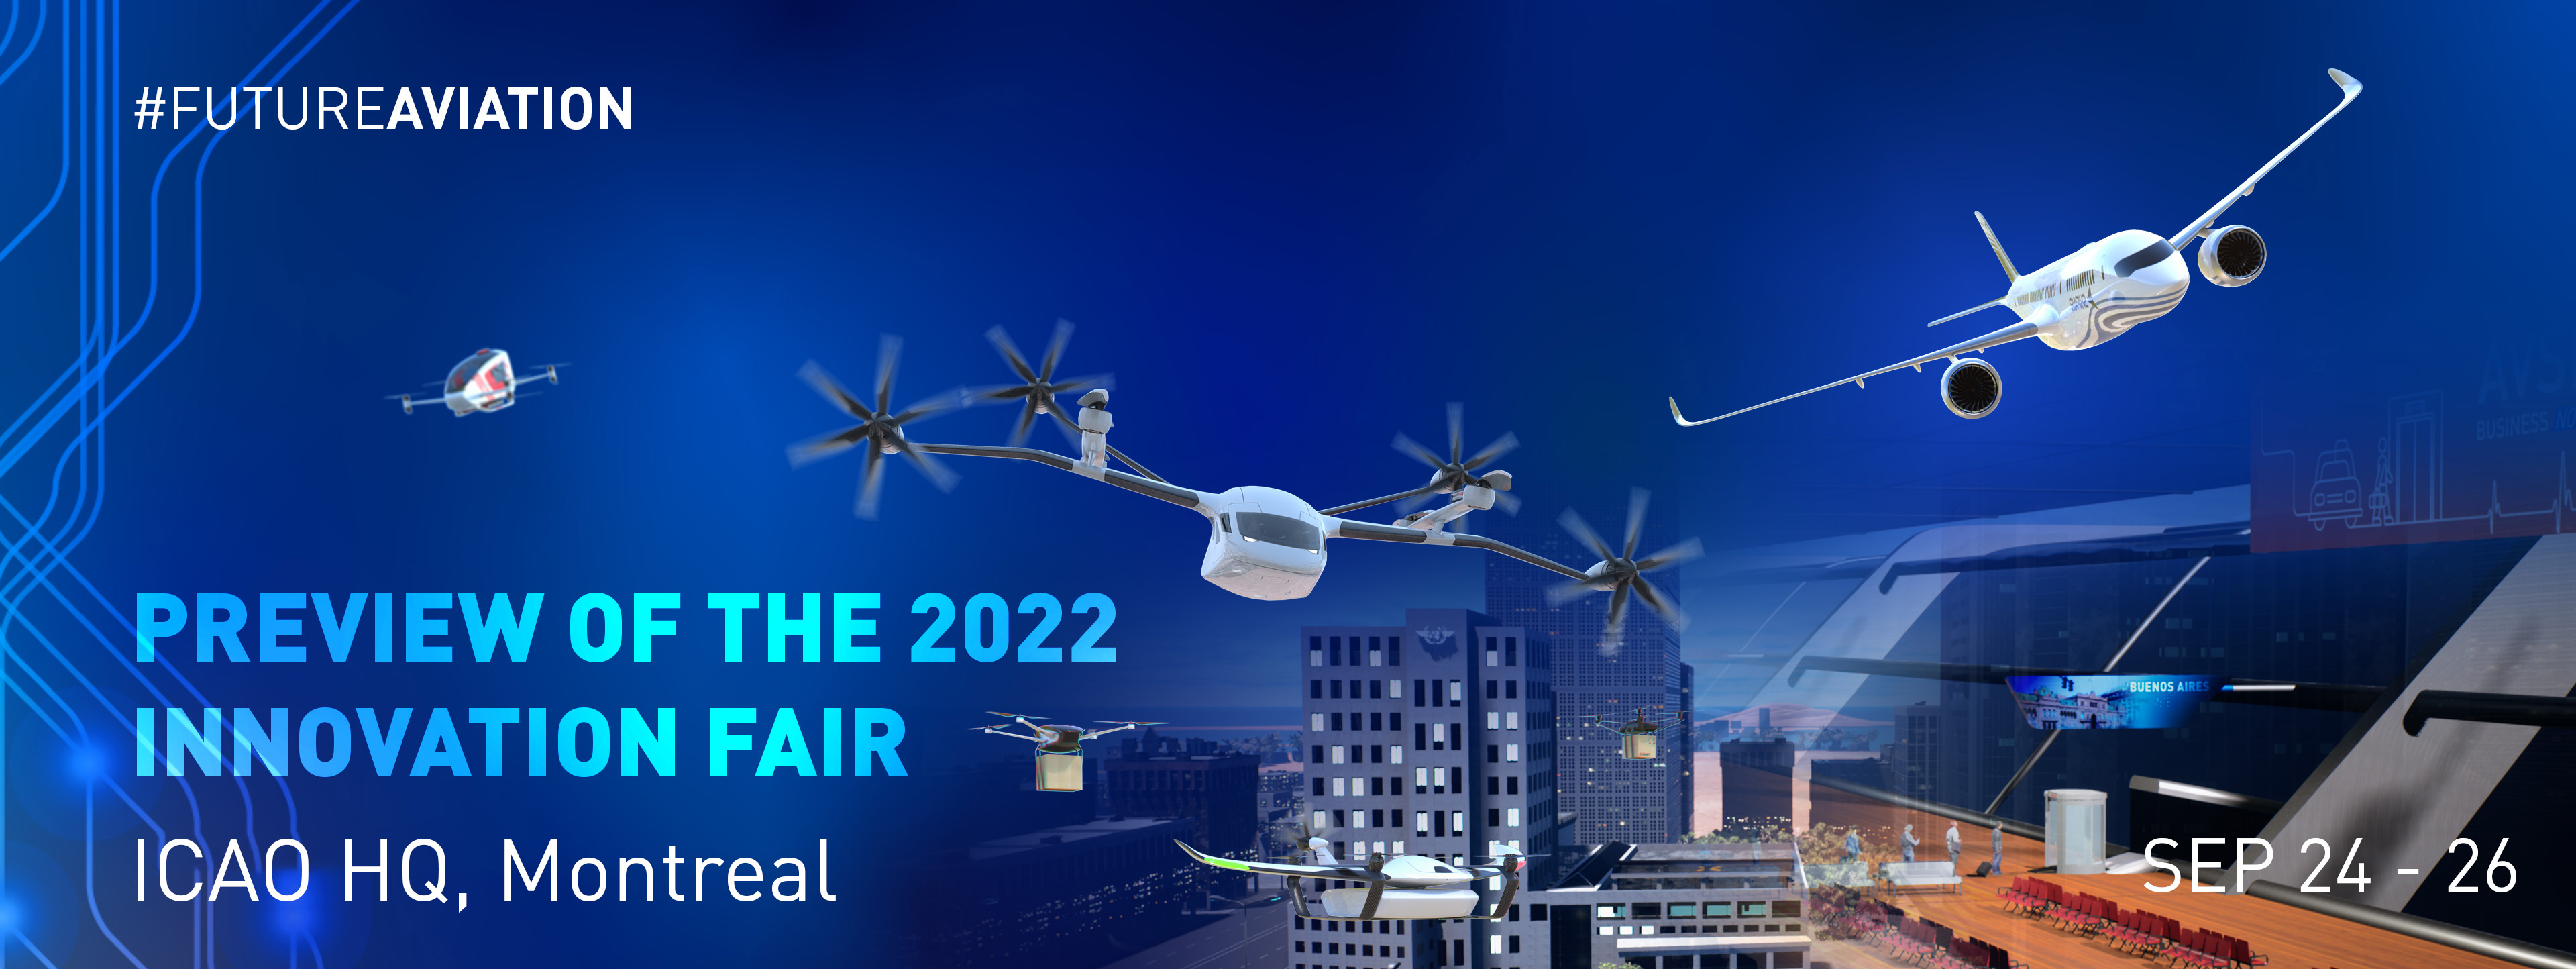 Preview of the ICAO 2022 Innovation Fair